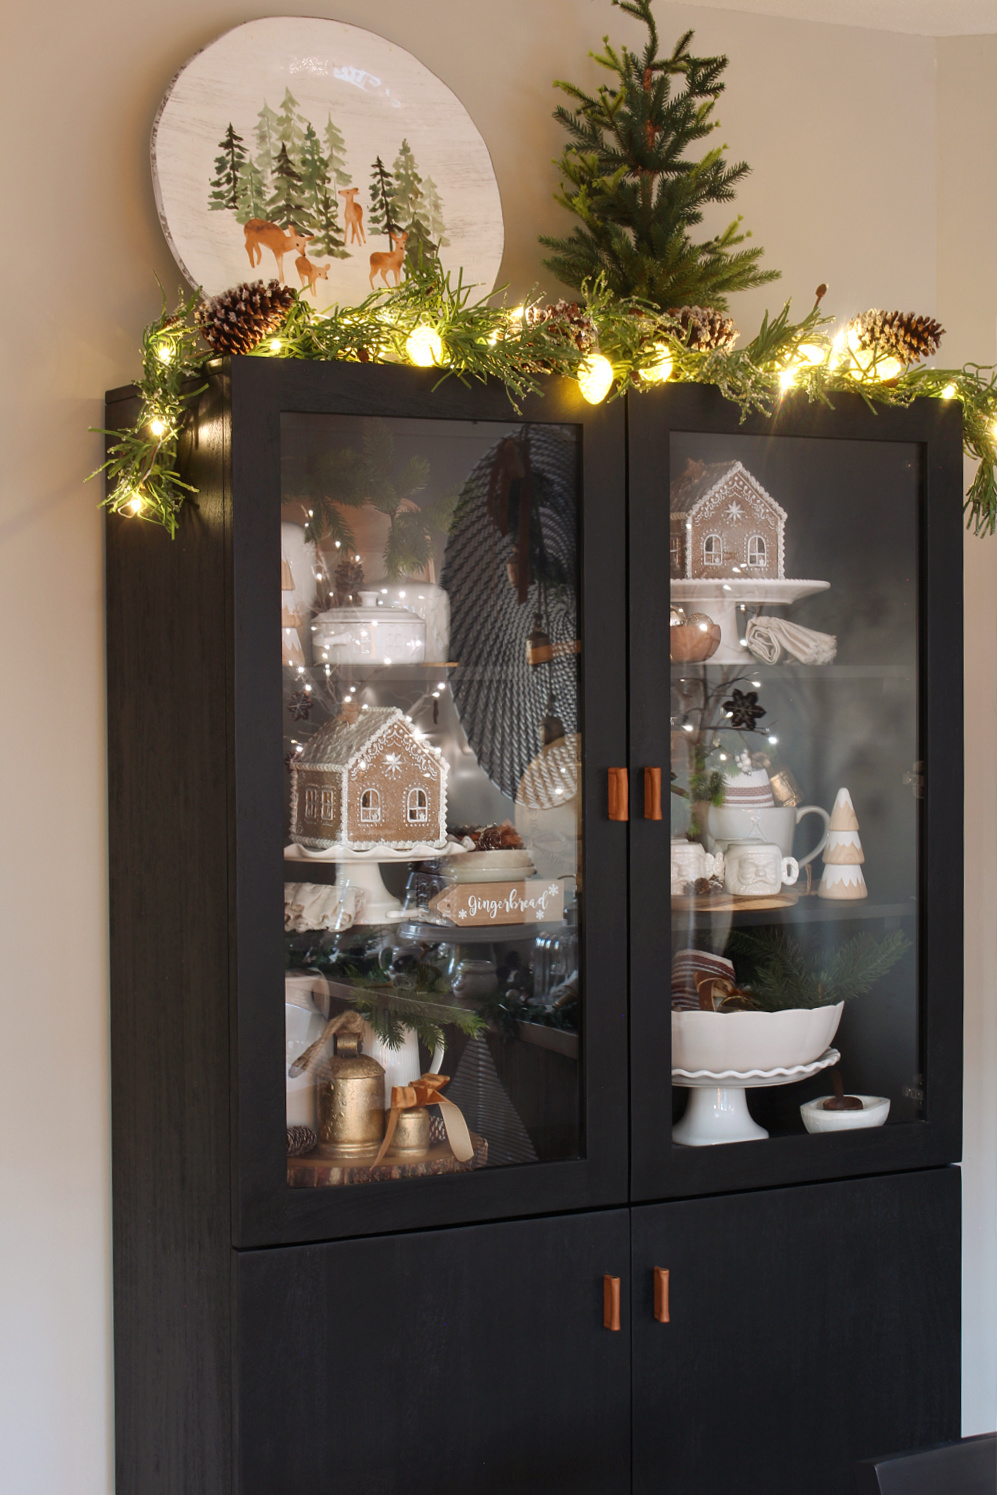 Black dining room cabinet decorated for Christmas with garland, lights and gingerbread houses.